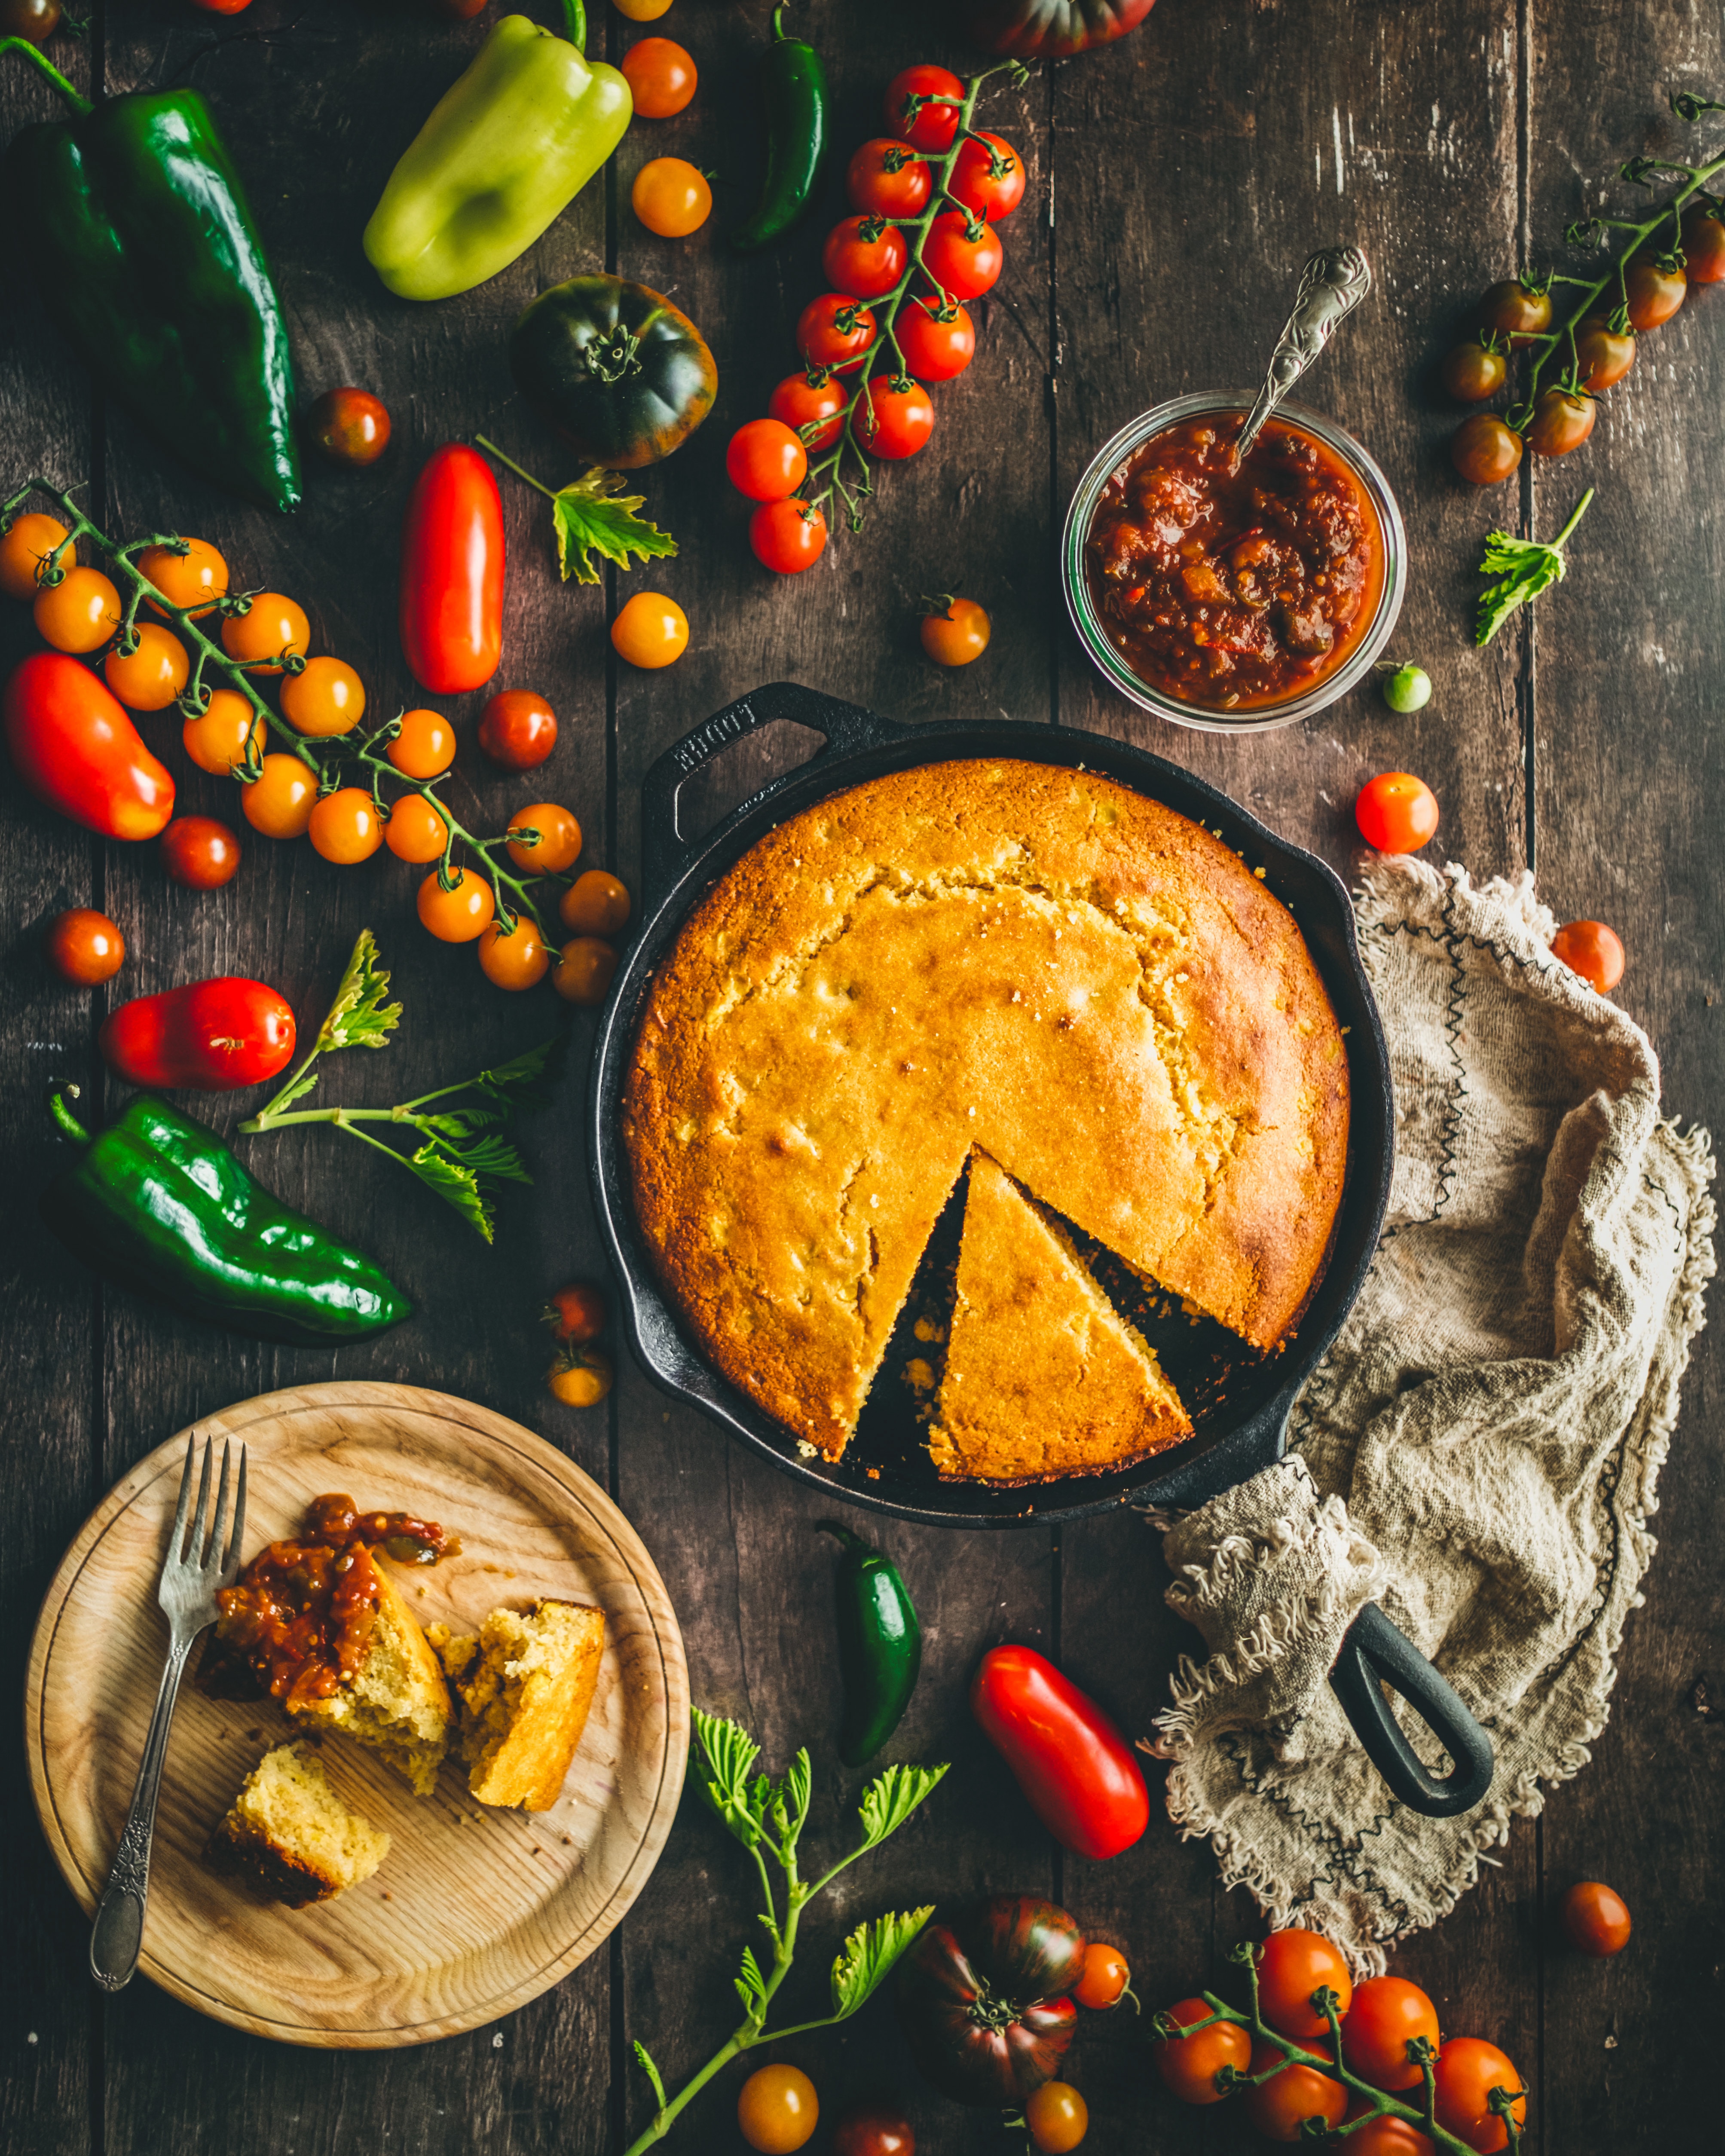 Skillet cornbread styled with tomatoes, peppers, and tomato pepper jam